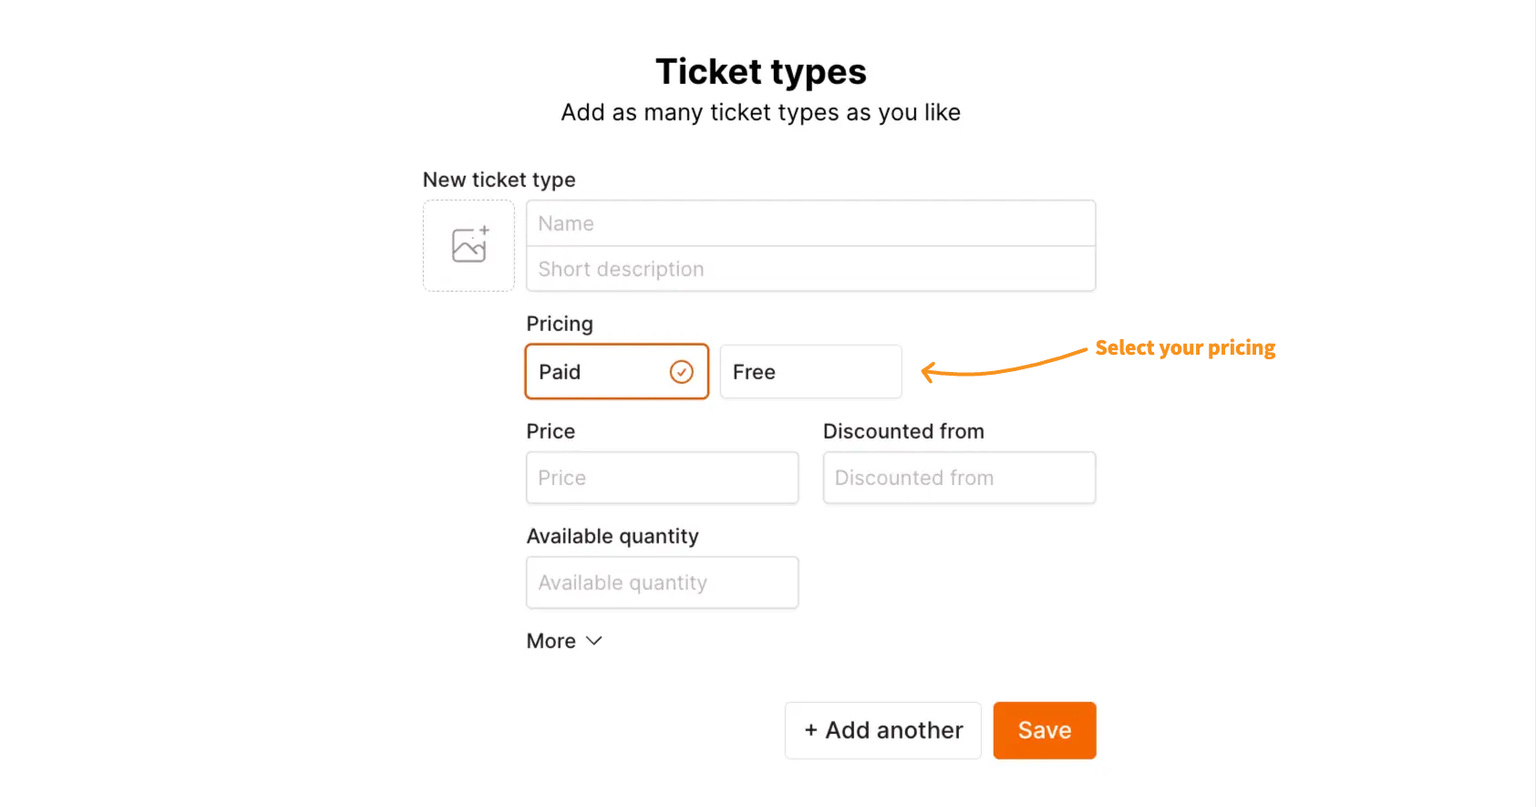 Ticket type pricing is a required field